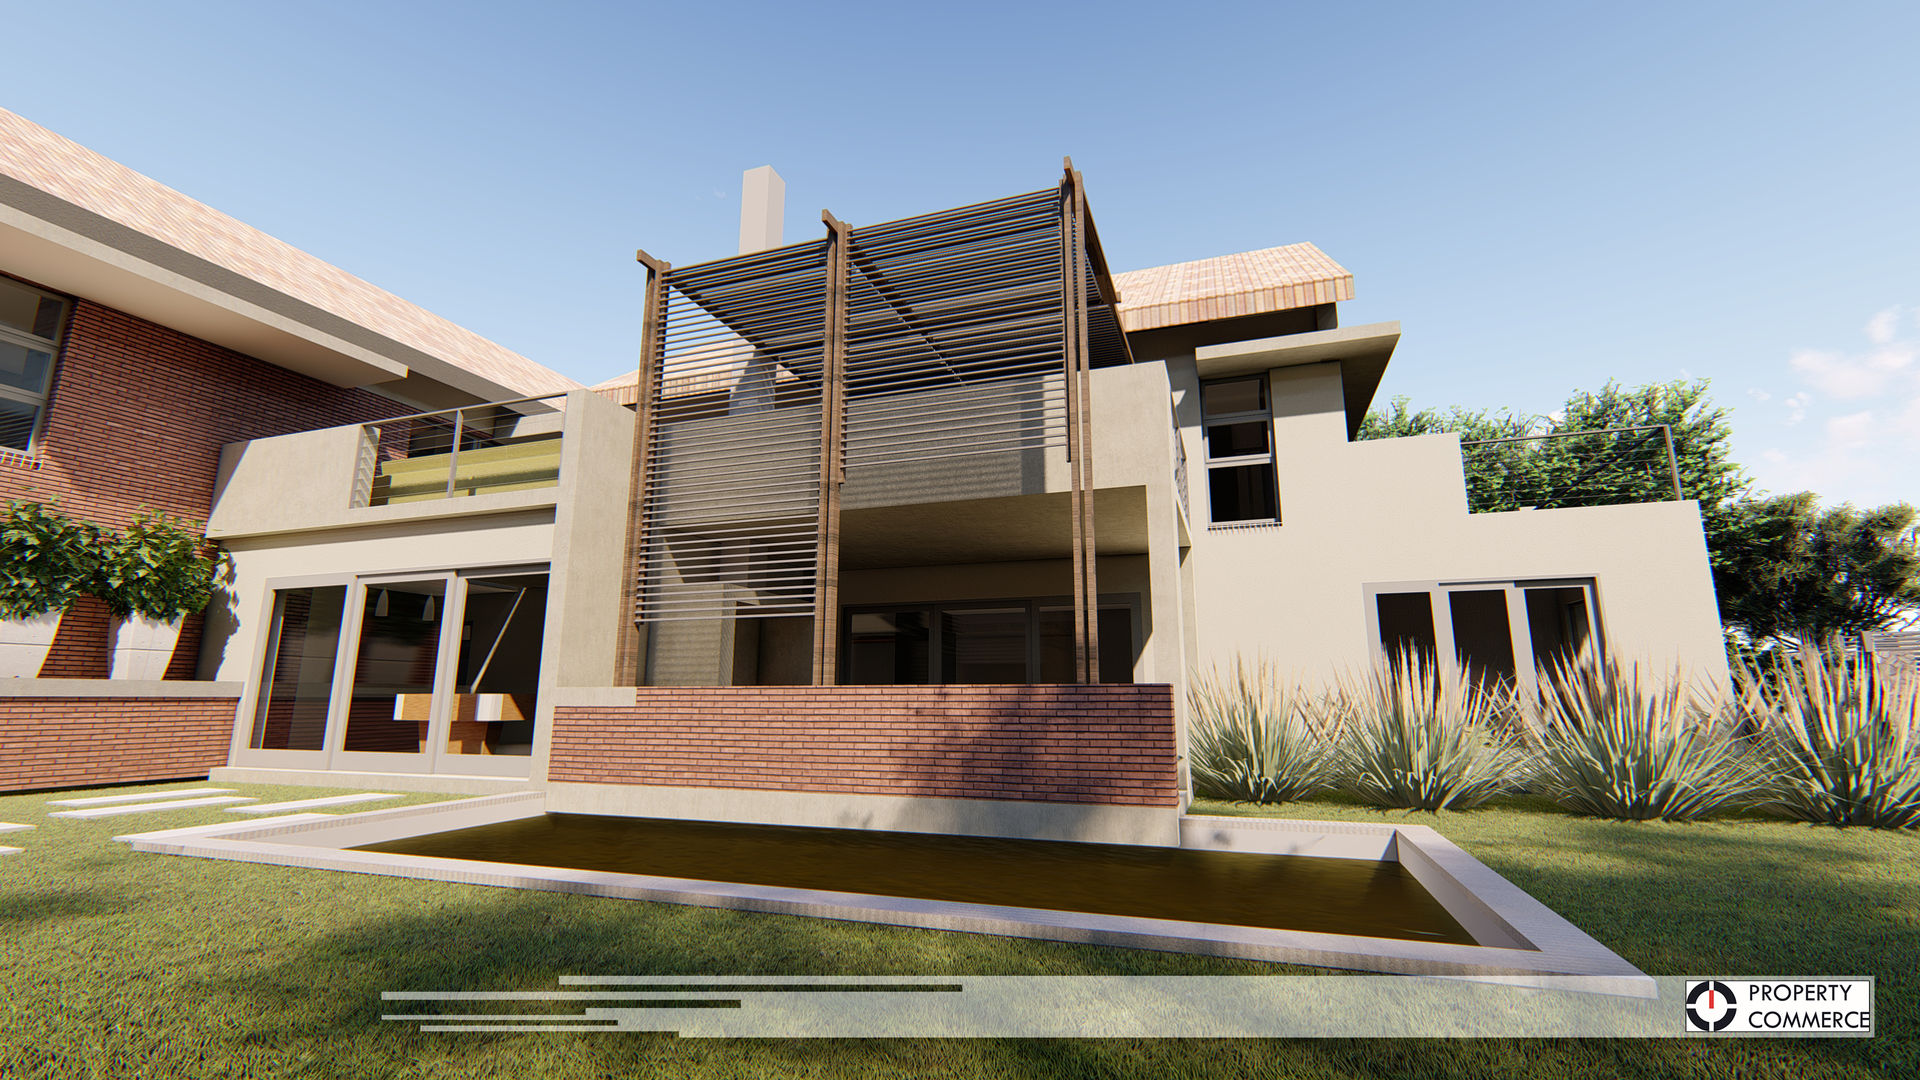 House Companie, Property Commerce Architects Property Commerce Architects Modern balcony, veranda & terrace